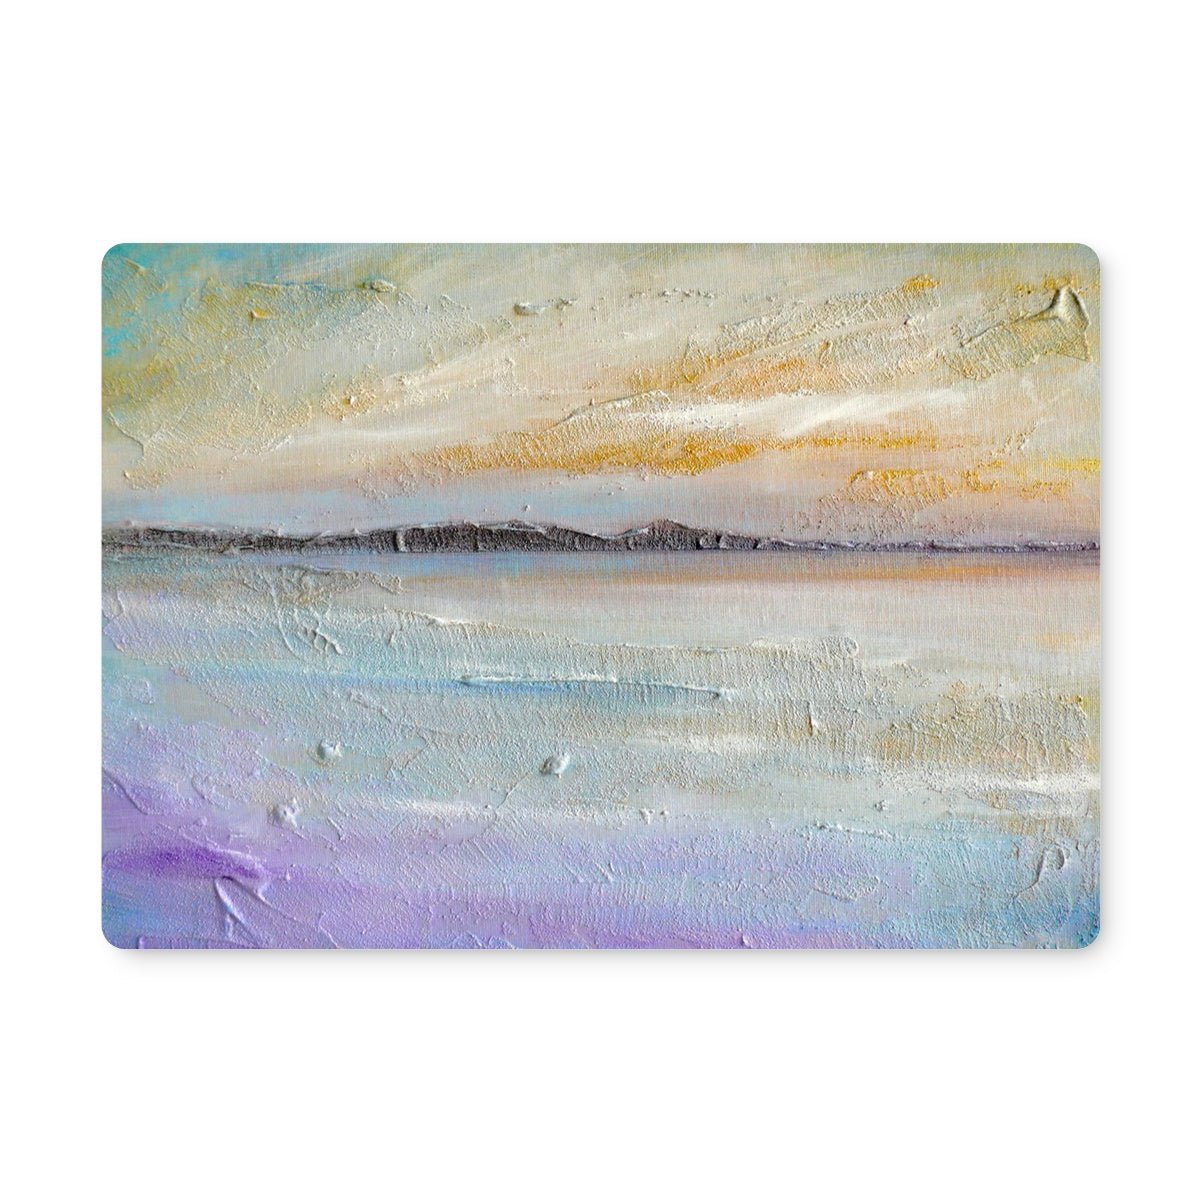 Sollas Beach North Uist Art Gifts Placemat-Placemats-Hebridean Islands Art Gallery-2 Placemats-Paintings, Prints, Homeware, Art Gifts From Scotland By Scottish Artist Kevin Hunter